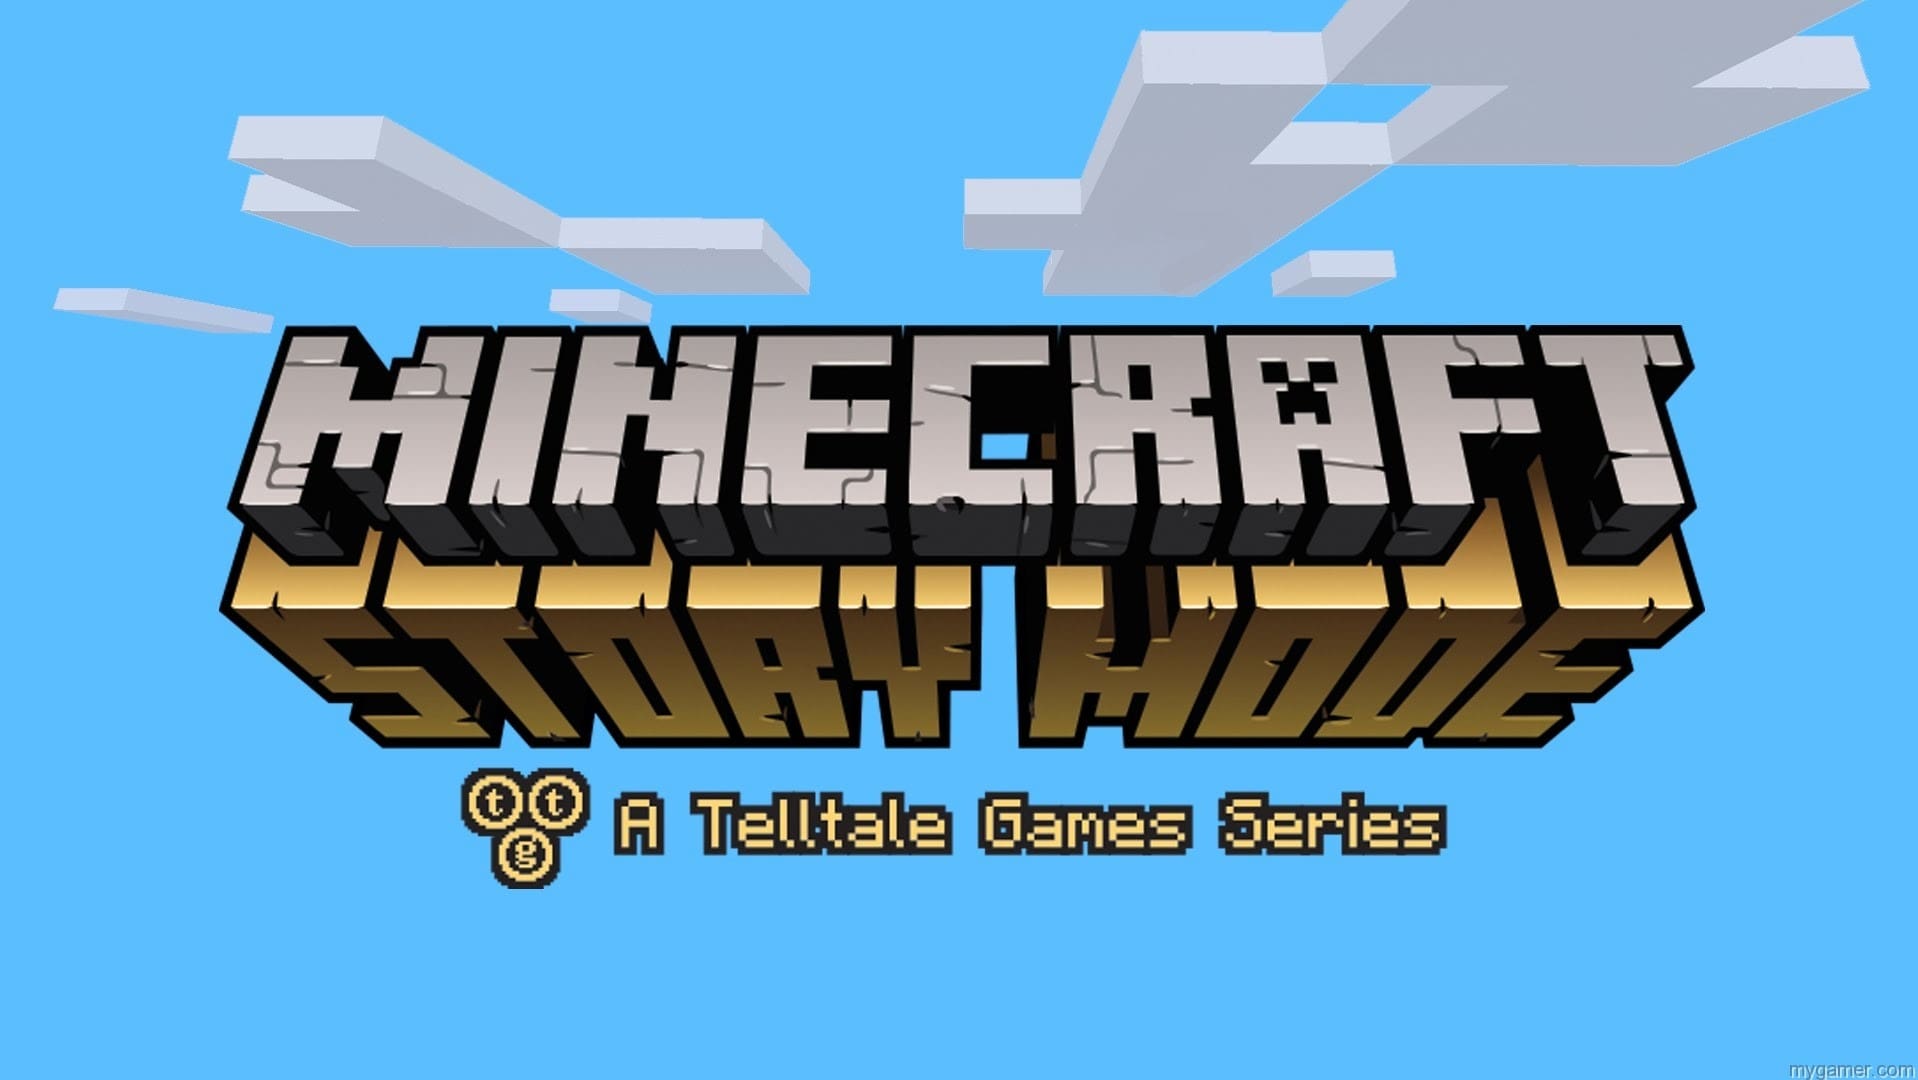 Minecraft Story Mode by Telltale Games and Mojang